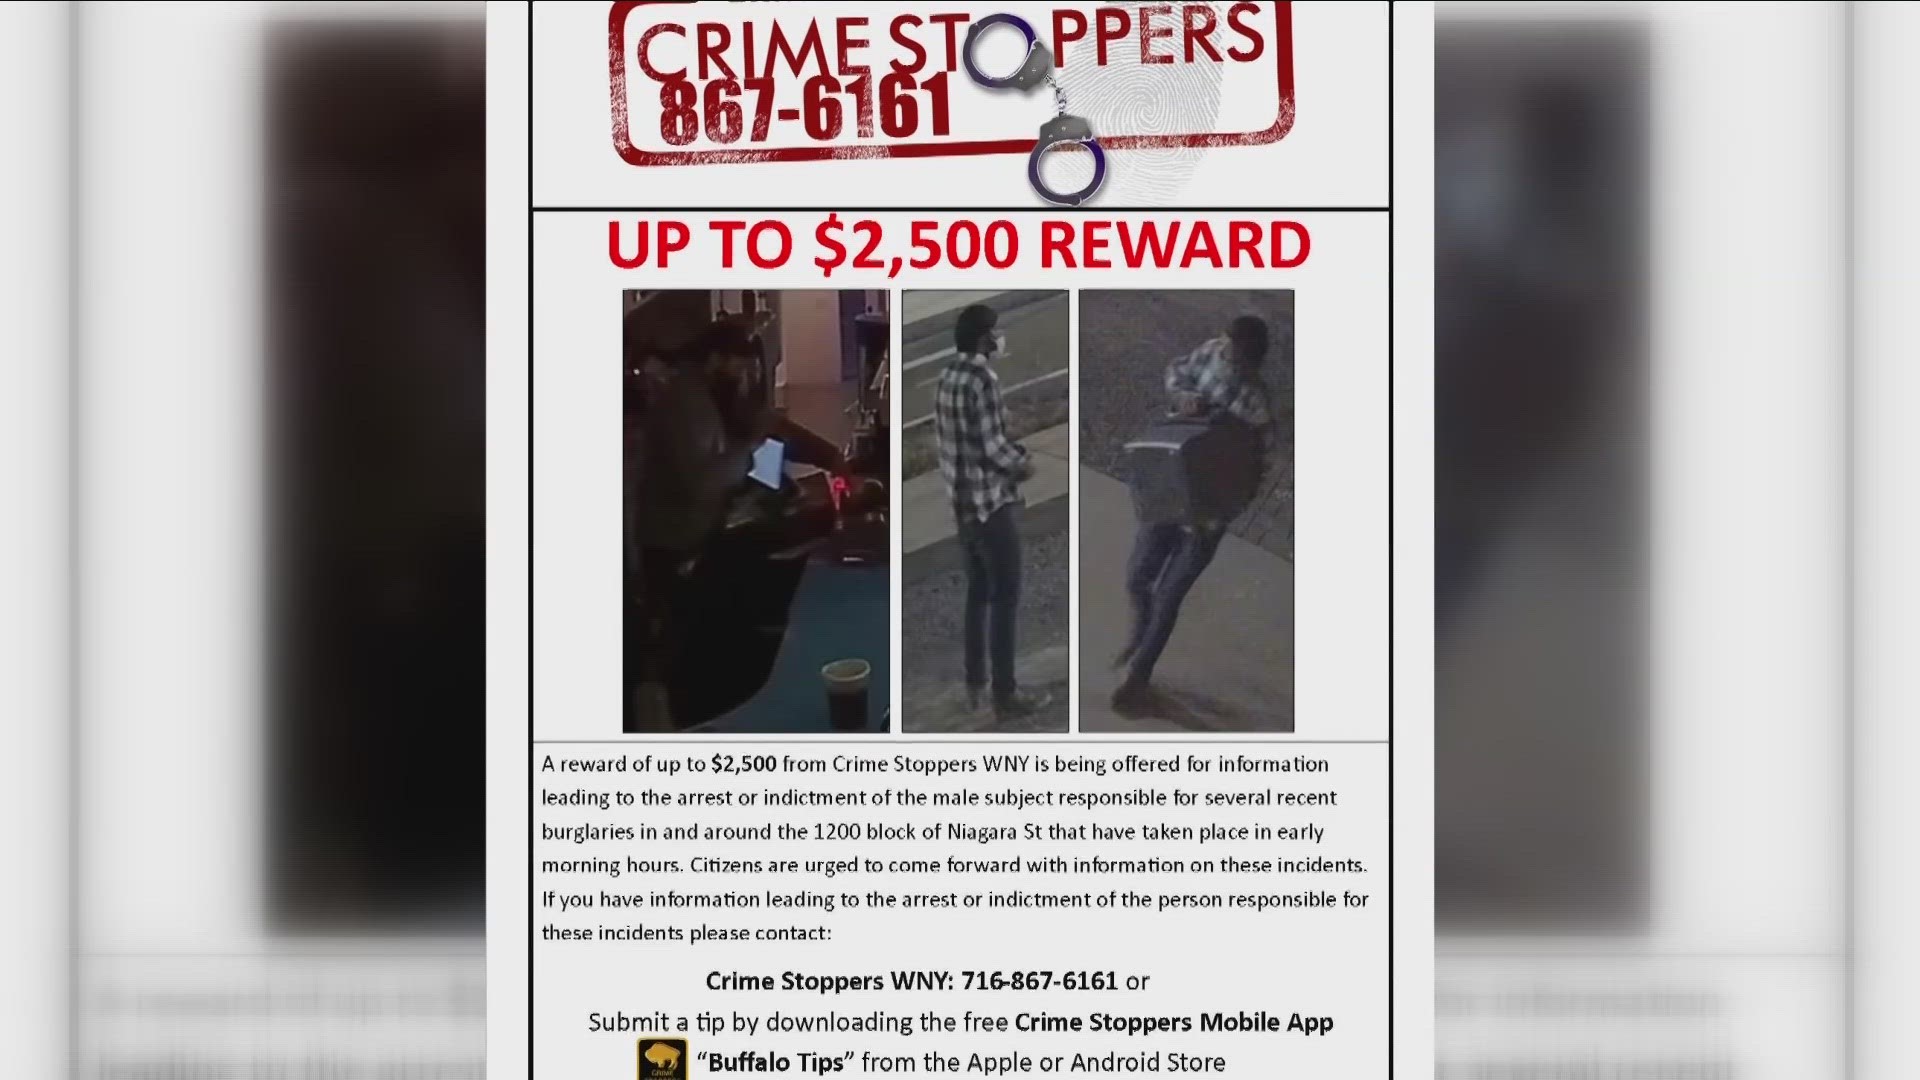 Crime Stoppers needs your help to catch a person who may be responsible for breaking into businesses along Niagara Street